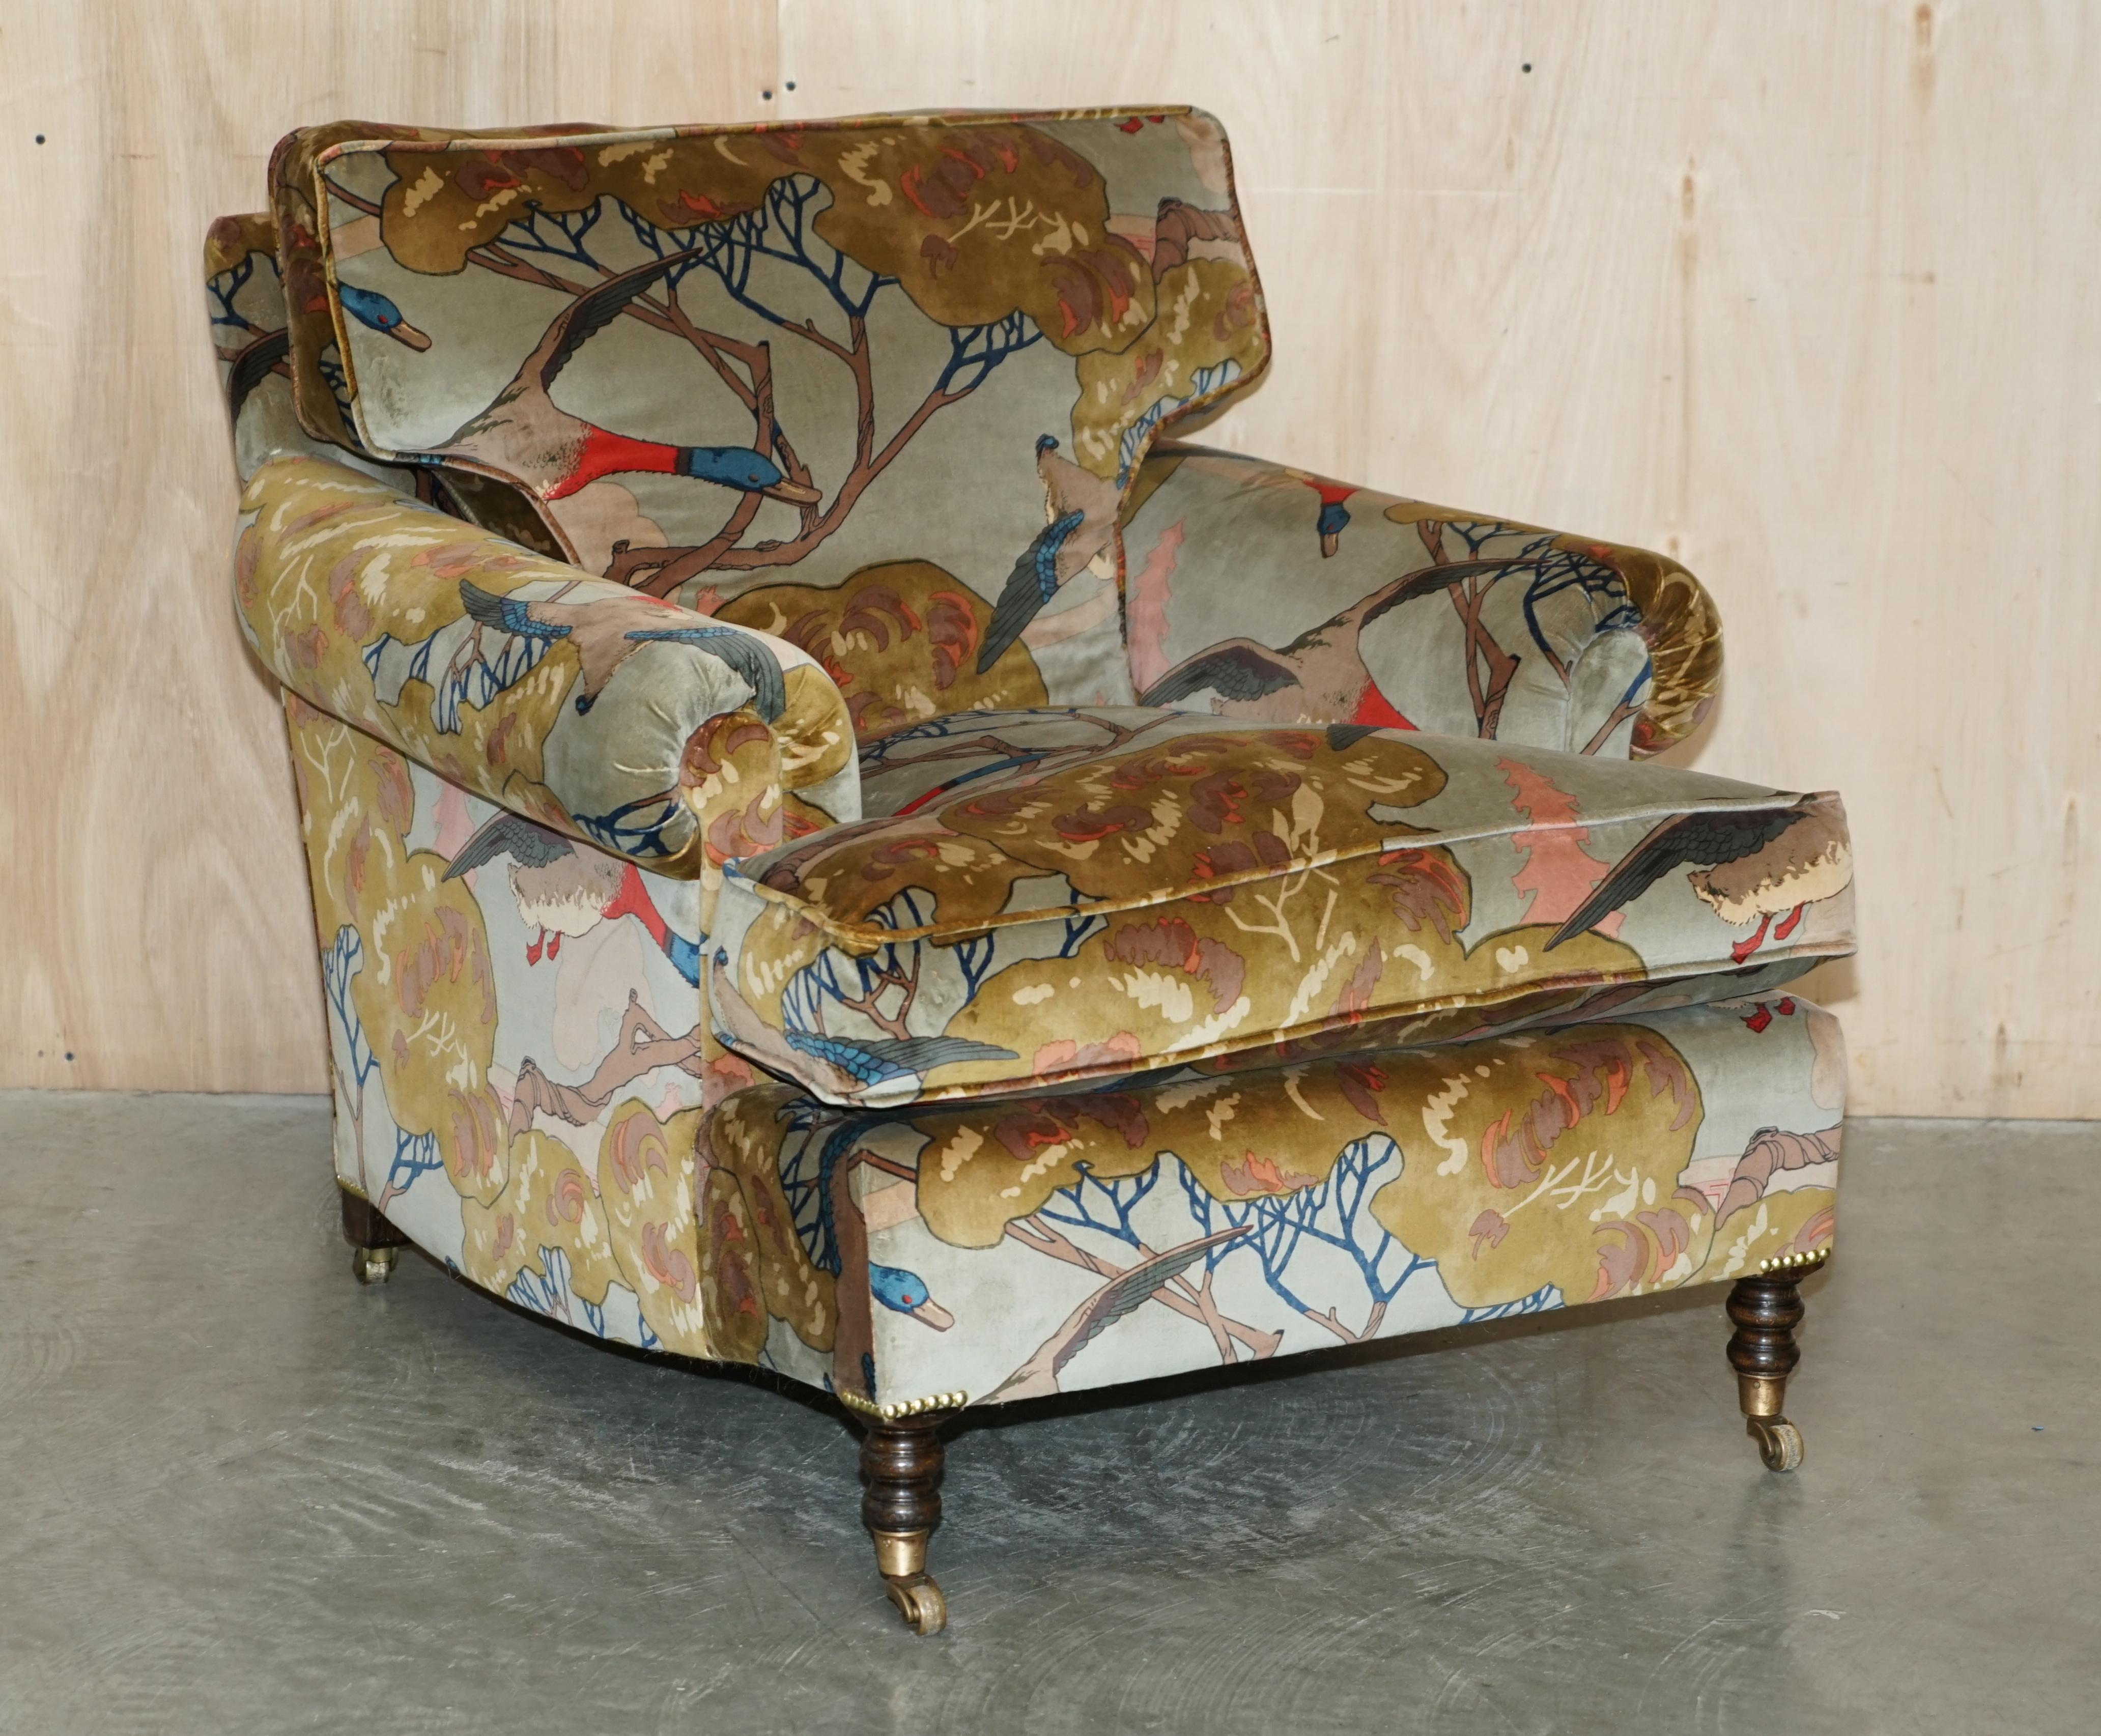 We are delighted to offer for sale this pair of fully refurbished, George Smith Signature Scroll arm armchairs and matching footstool upholstered in Mulberry Flying Ducks velvet

These are a brand newly reupholstered and restored to the finest